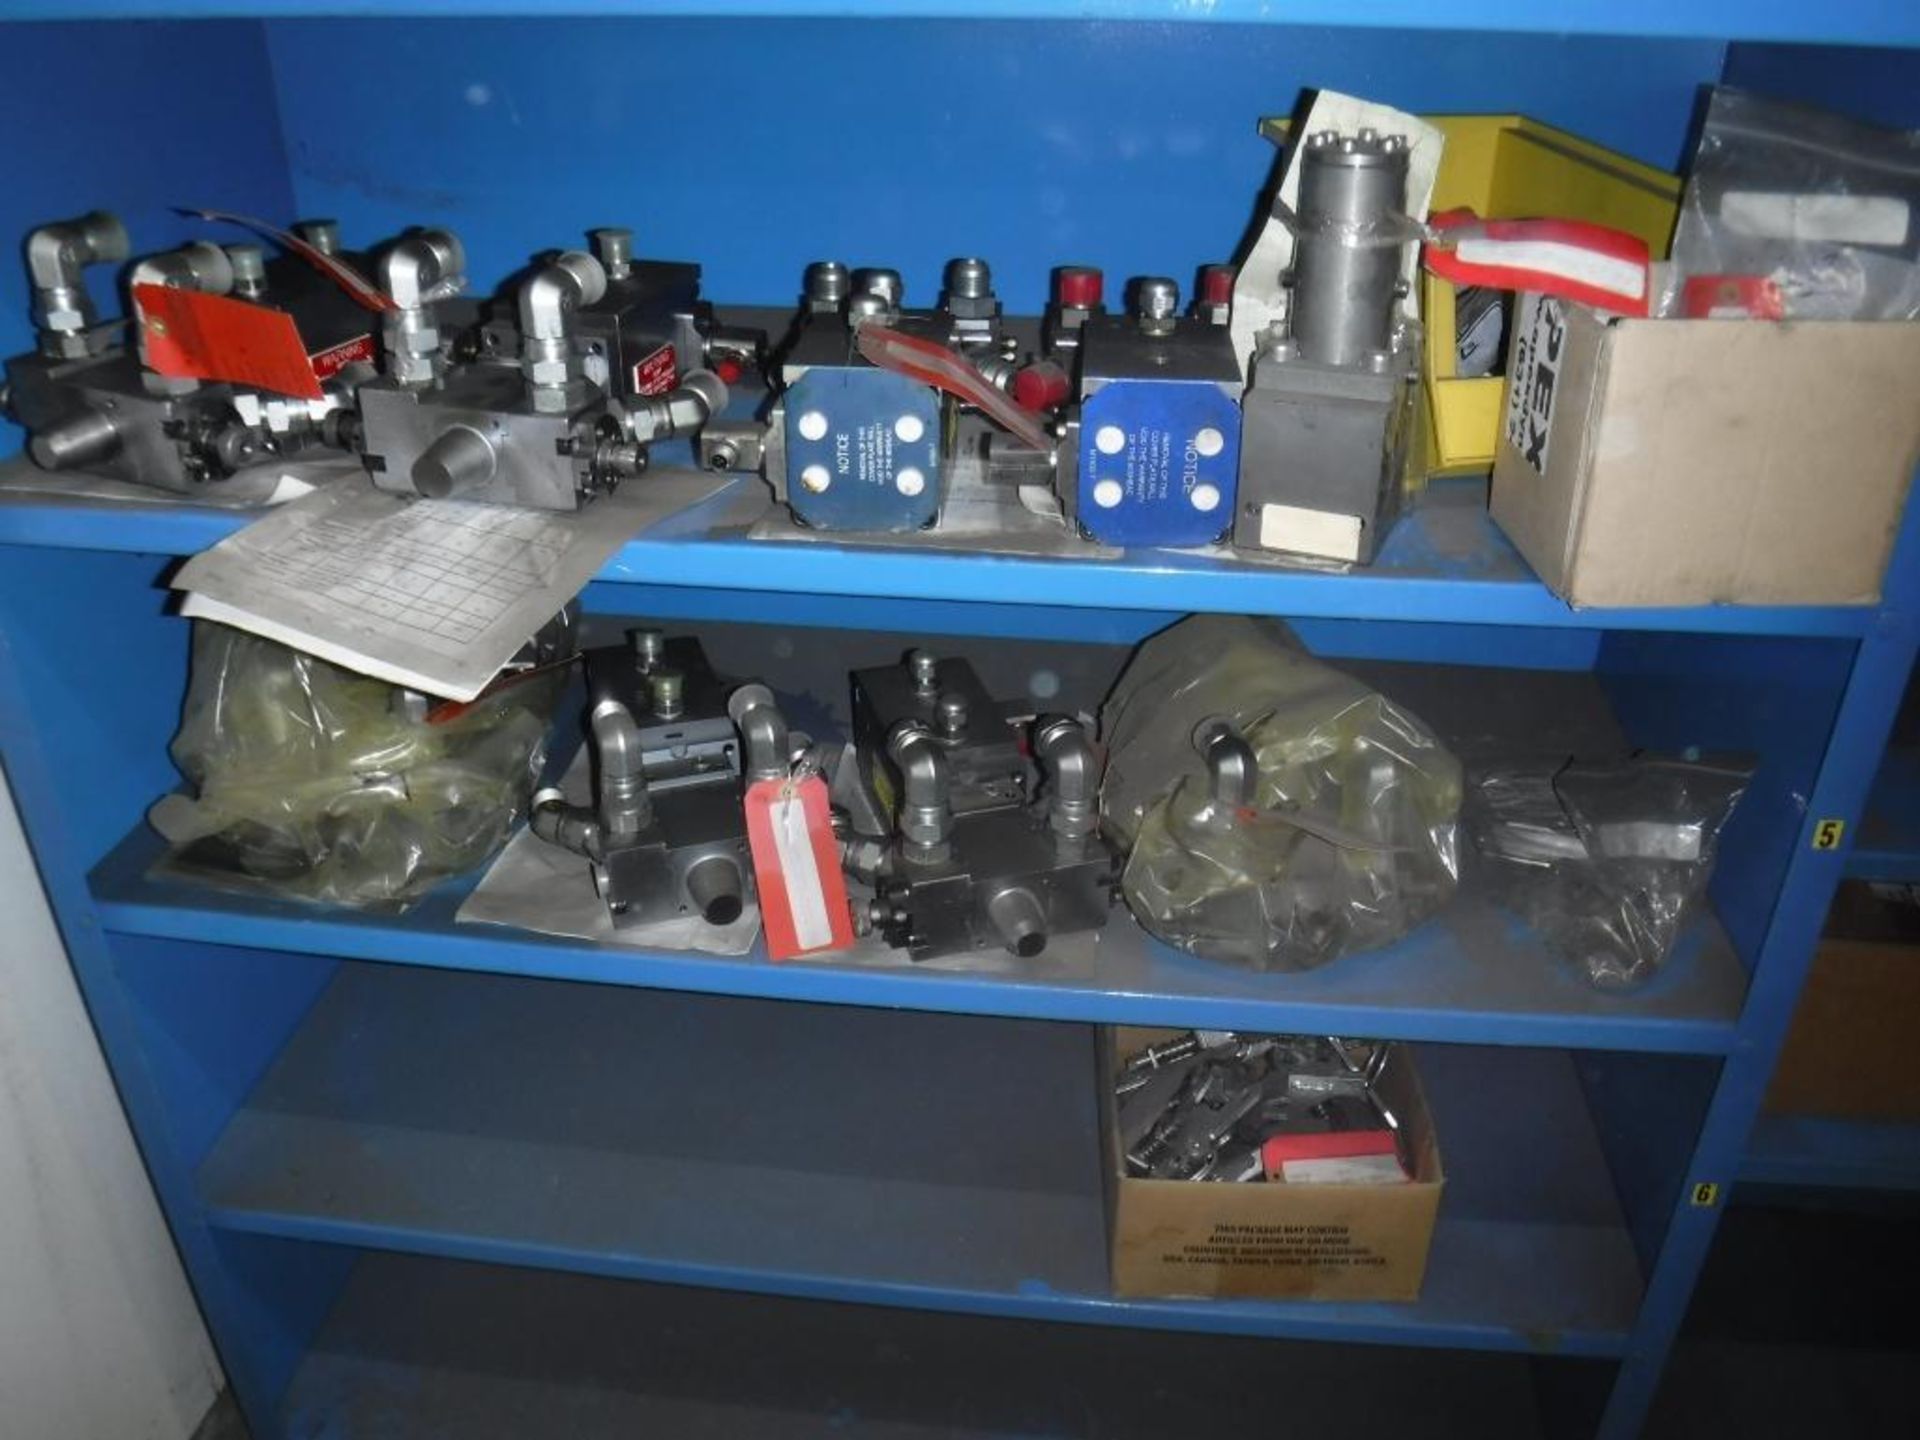 Contents of 2-Shelf Units-Mix Heads,Cables,Seating Valve,Axis Drives for Robts IRB 2000,Etc., LOCATE - Image 2 of 6